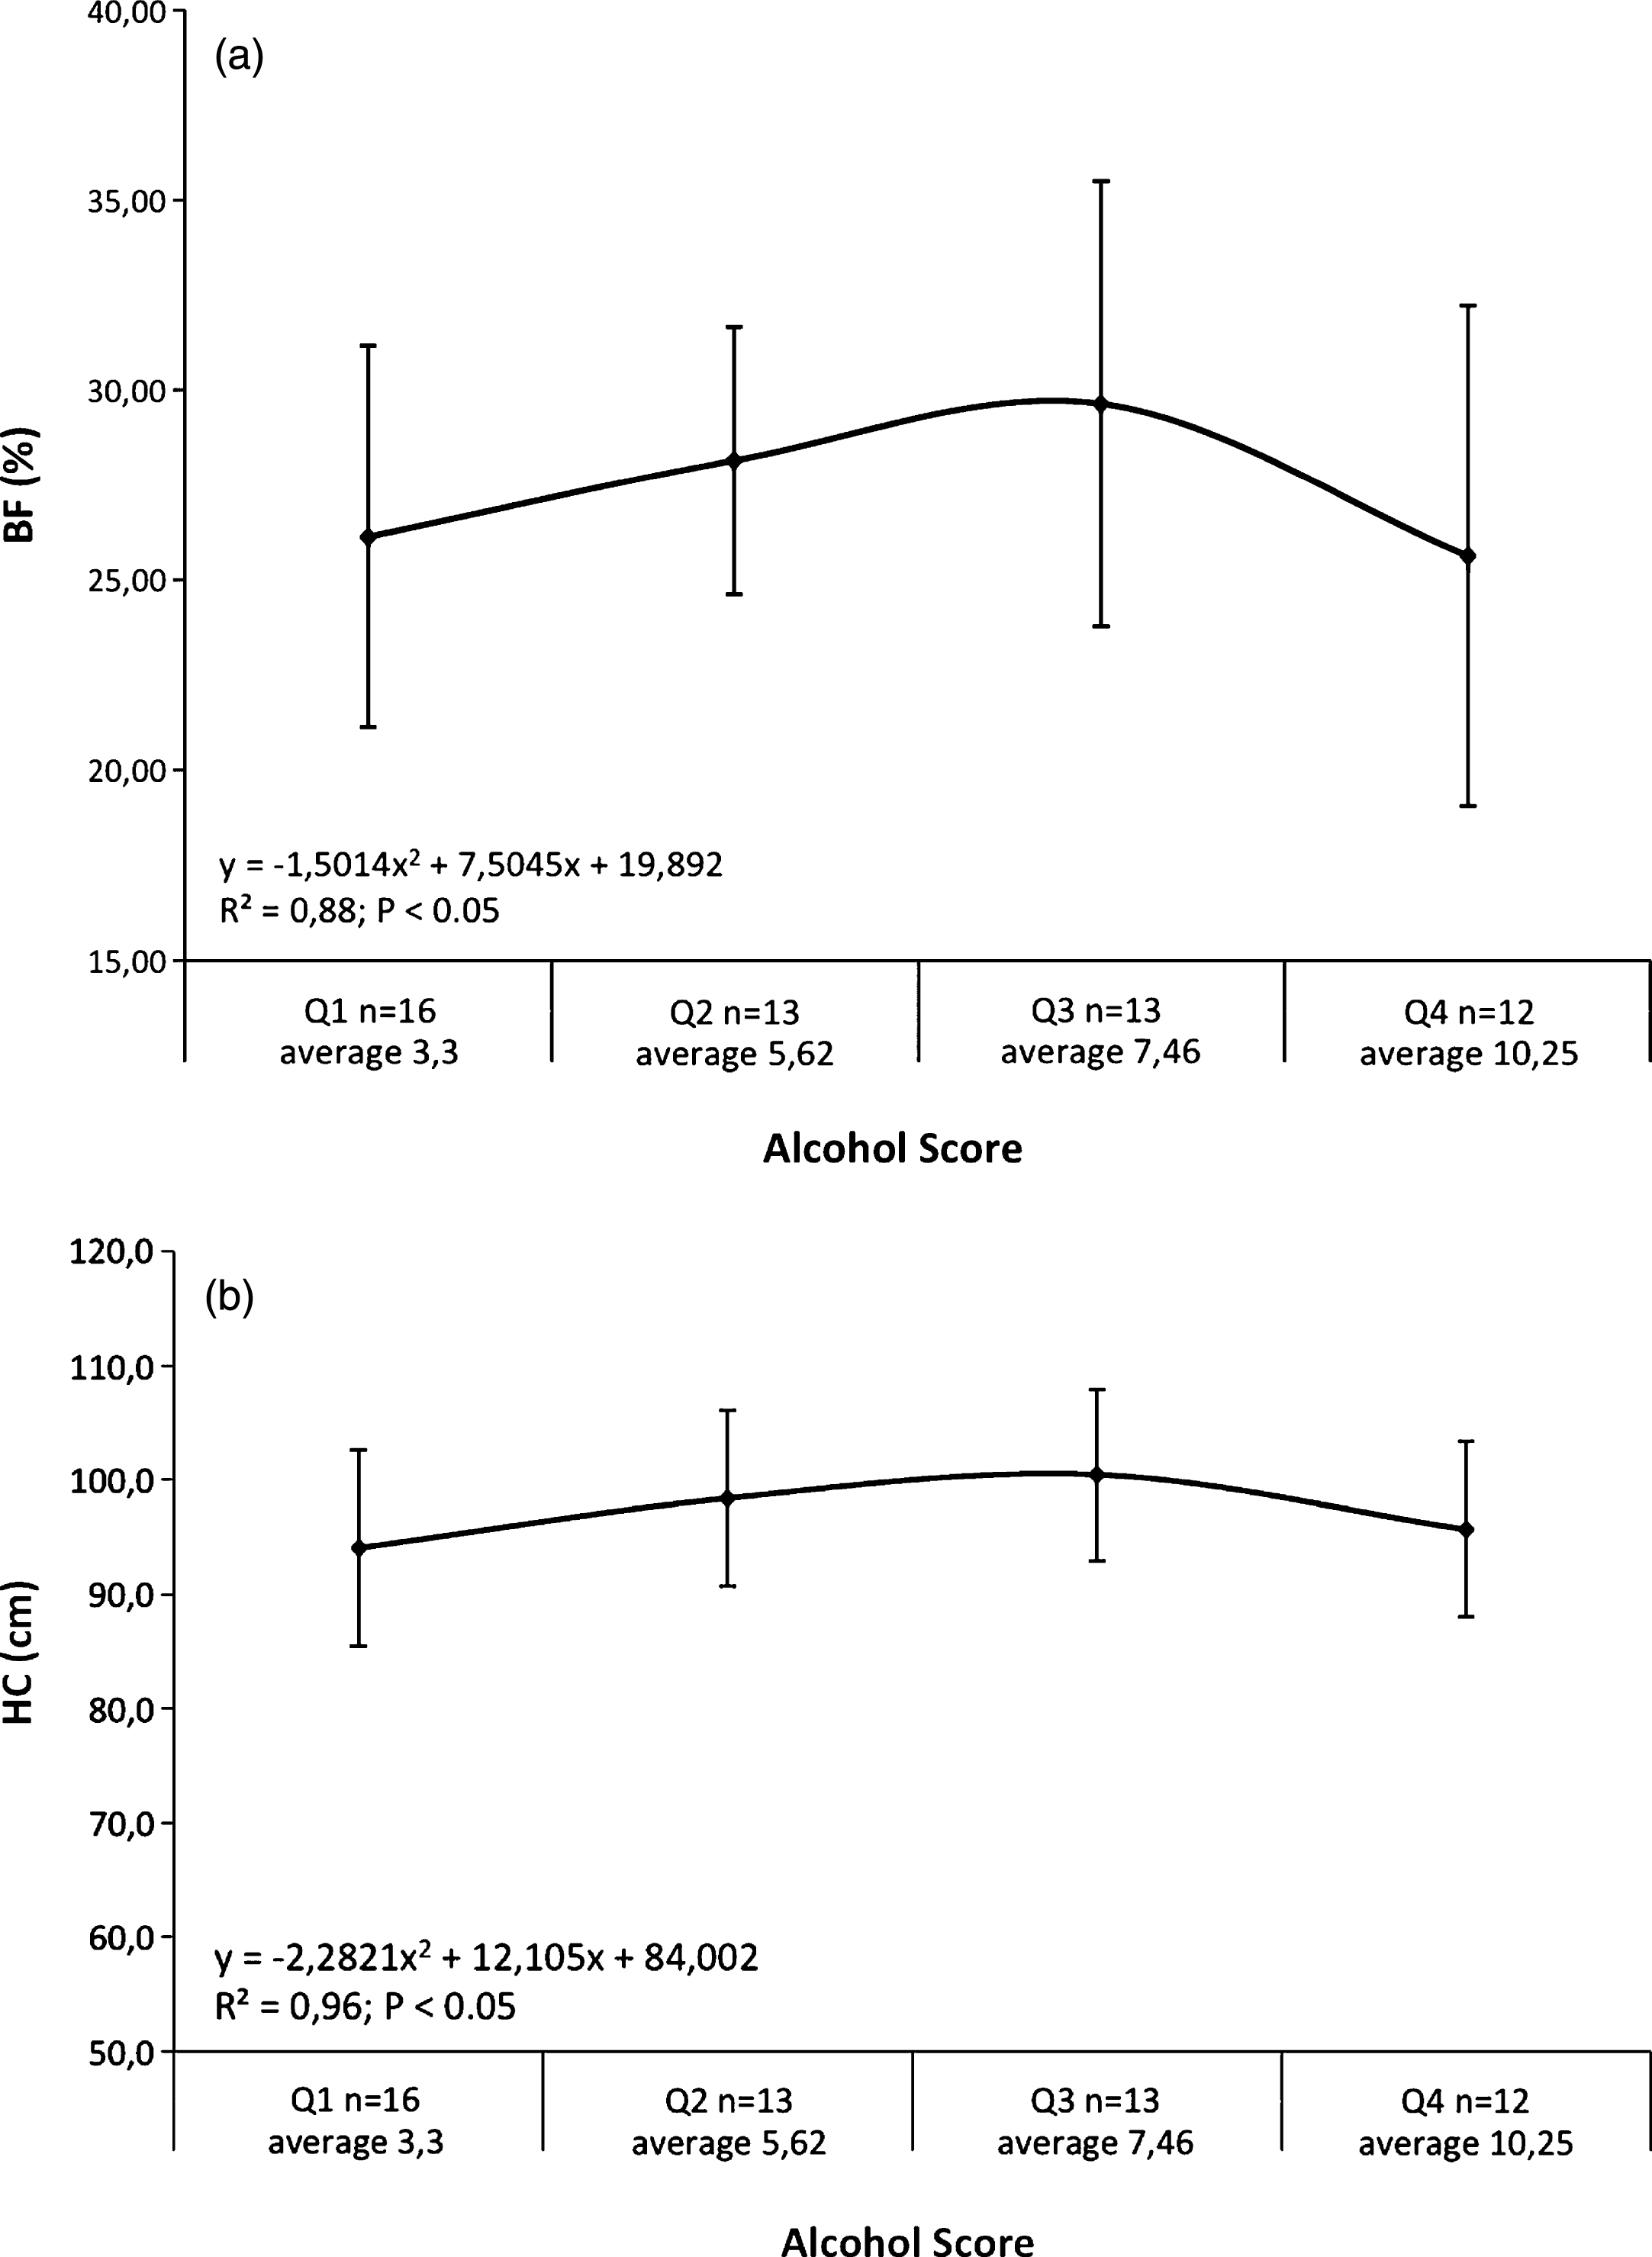 a. Mean body fat percentage (BF) according to quartiles of alcohol score in women. (b) Mean hips circumferences (HC) according to quartiles of alcohol score in women.